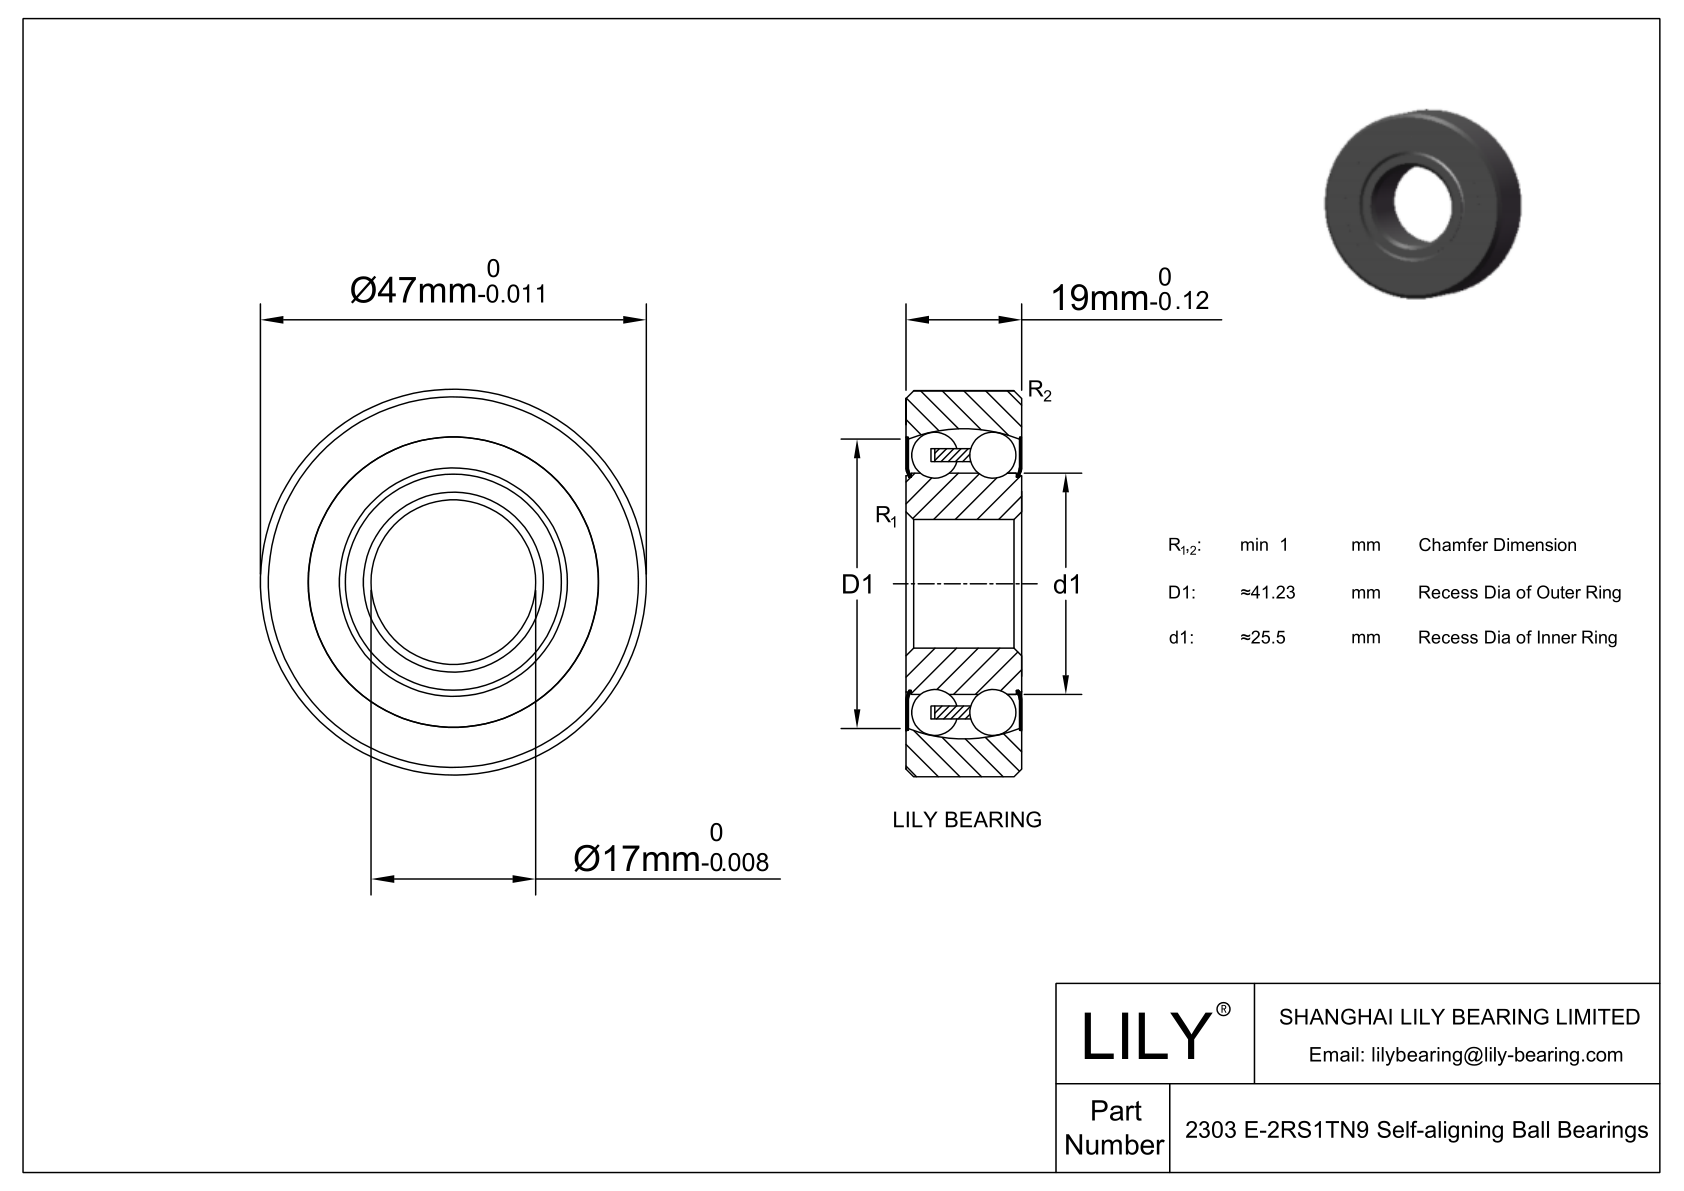 CE2303 E-SIPP Silicon Nitride Self Aligning Ball Bearings cad drawing